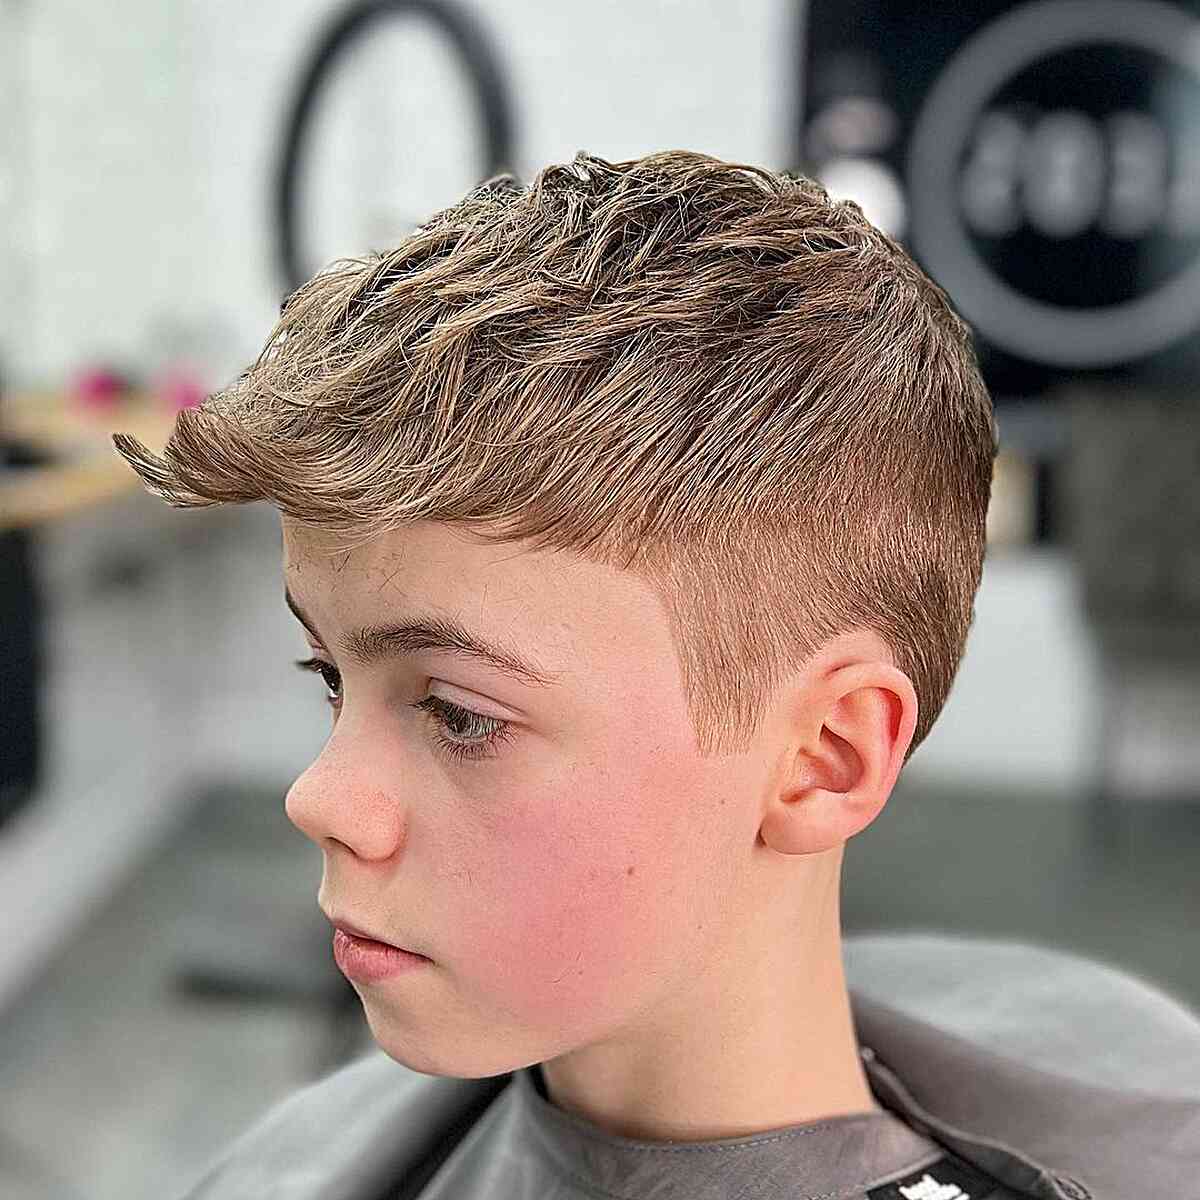 Long and Flipped Up Front for Little boys hairstyle